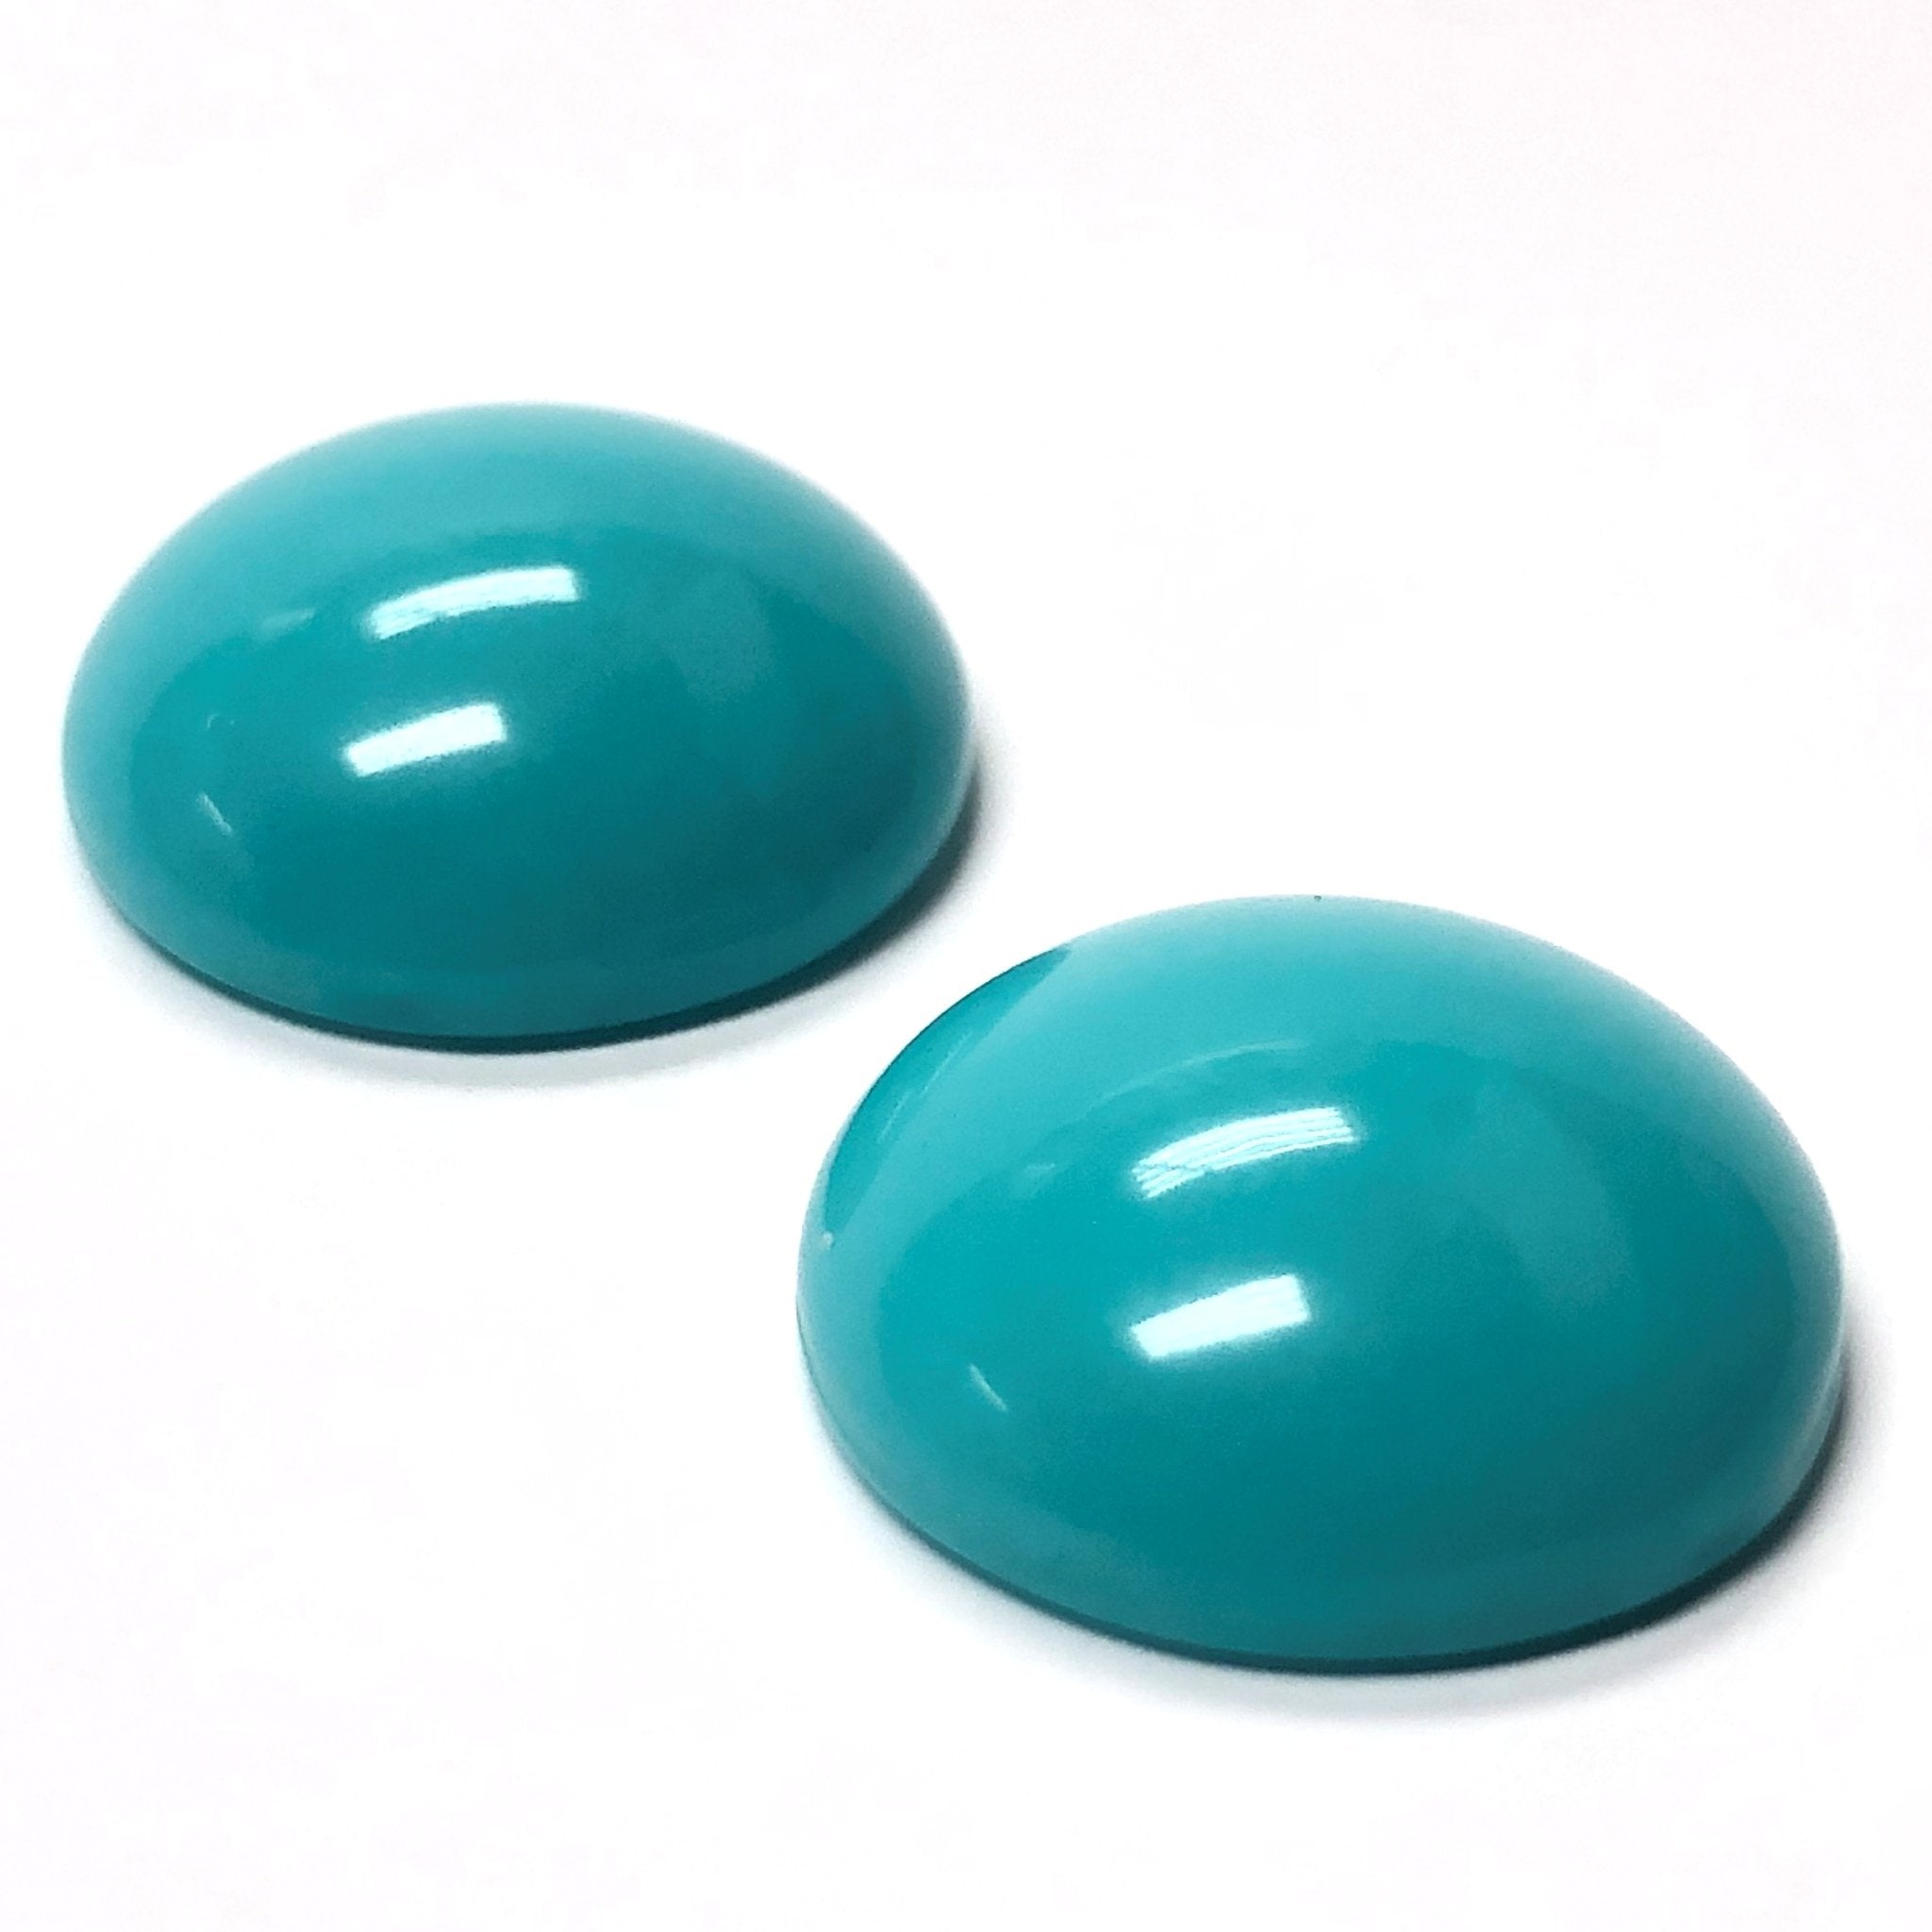 3MM Blue Turquoise Round Acrylic Cab (300 pieces)